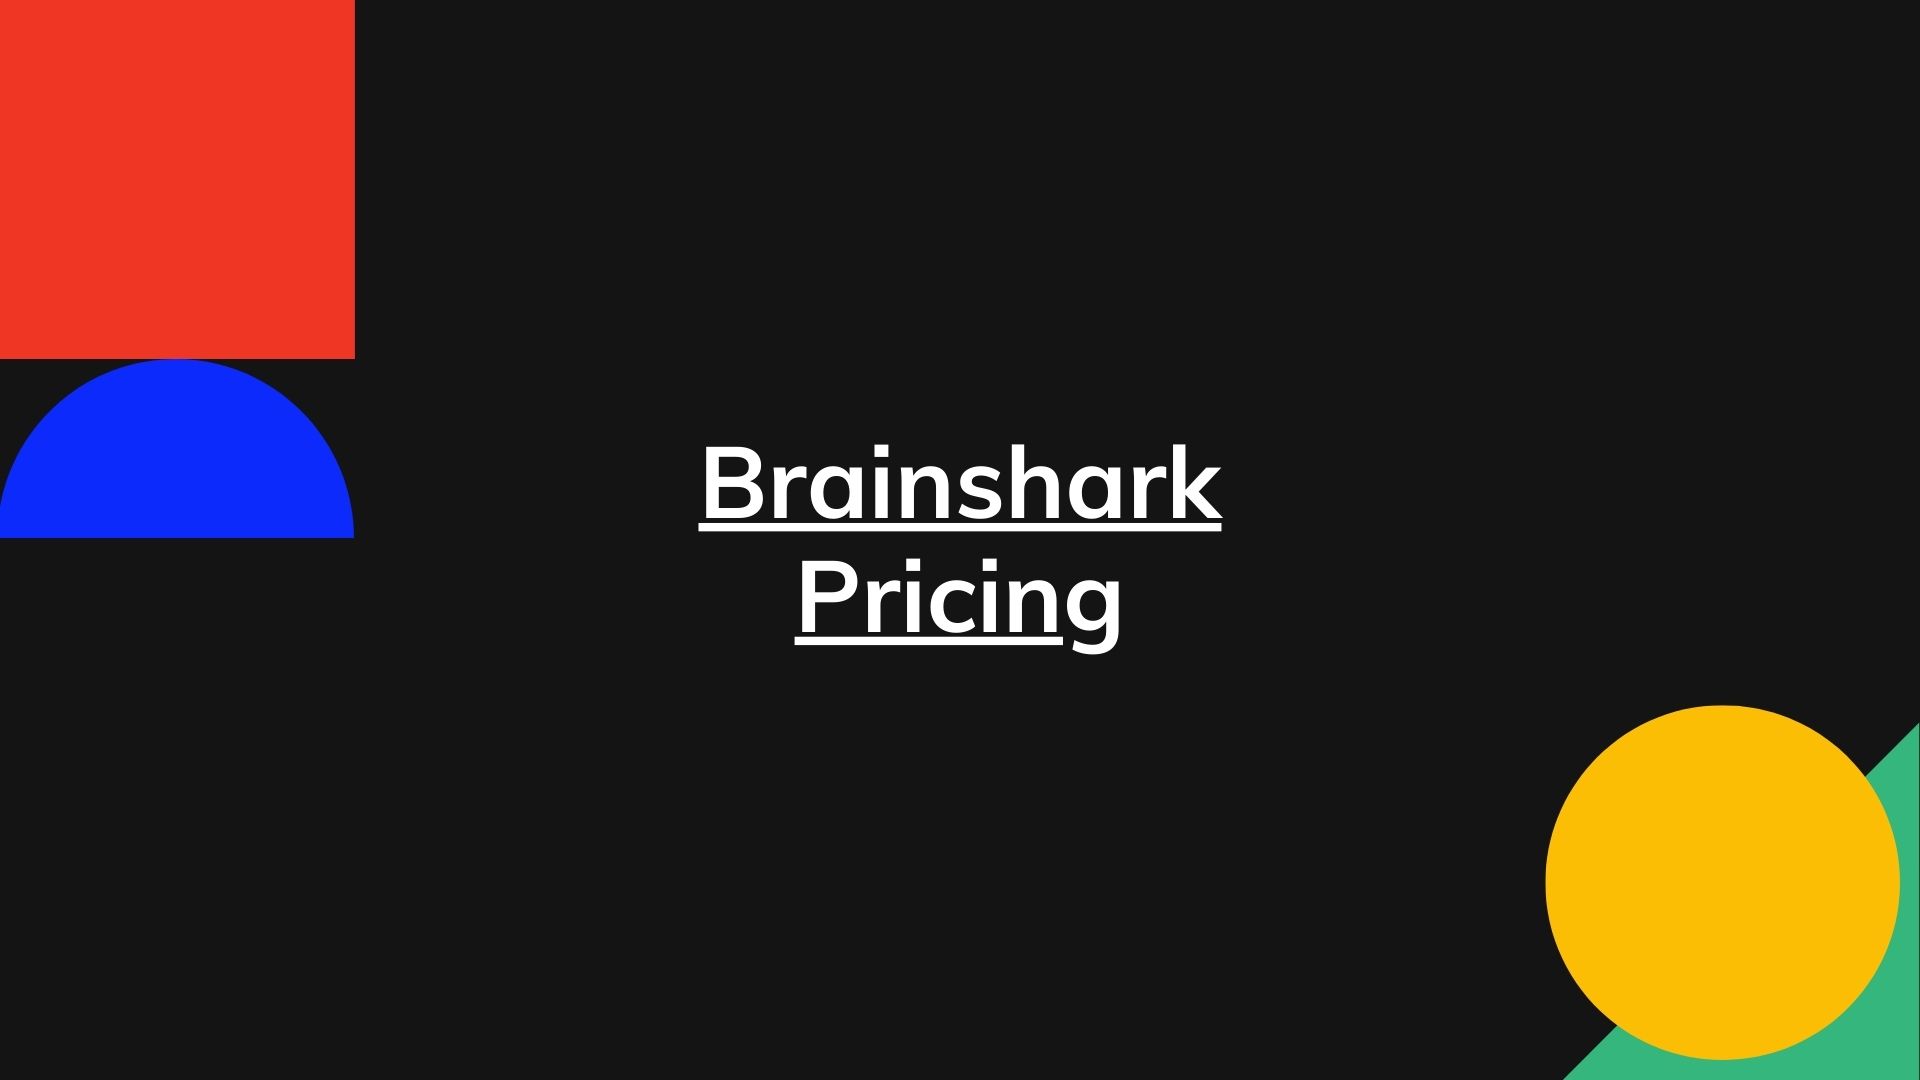 Brainshark Pricing – Actual Prices For All Plans, Enterprise Too